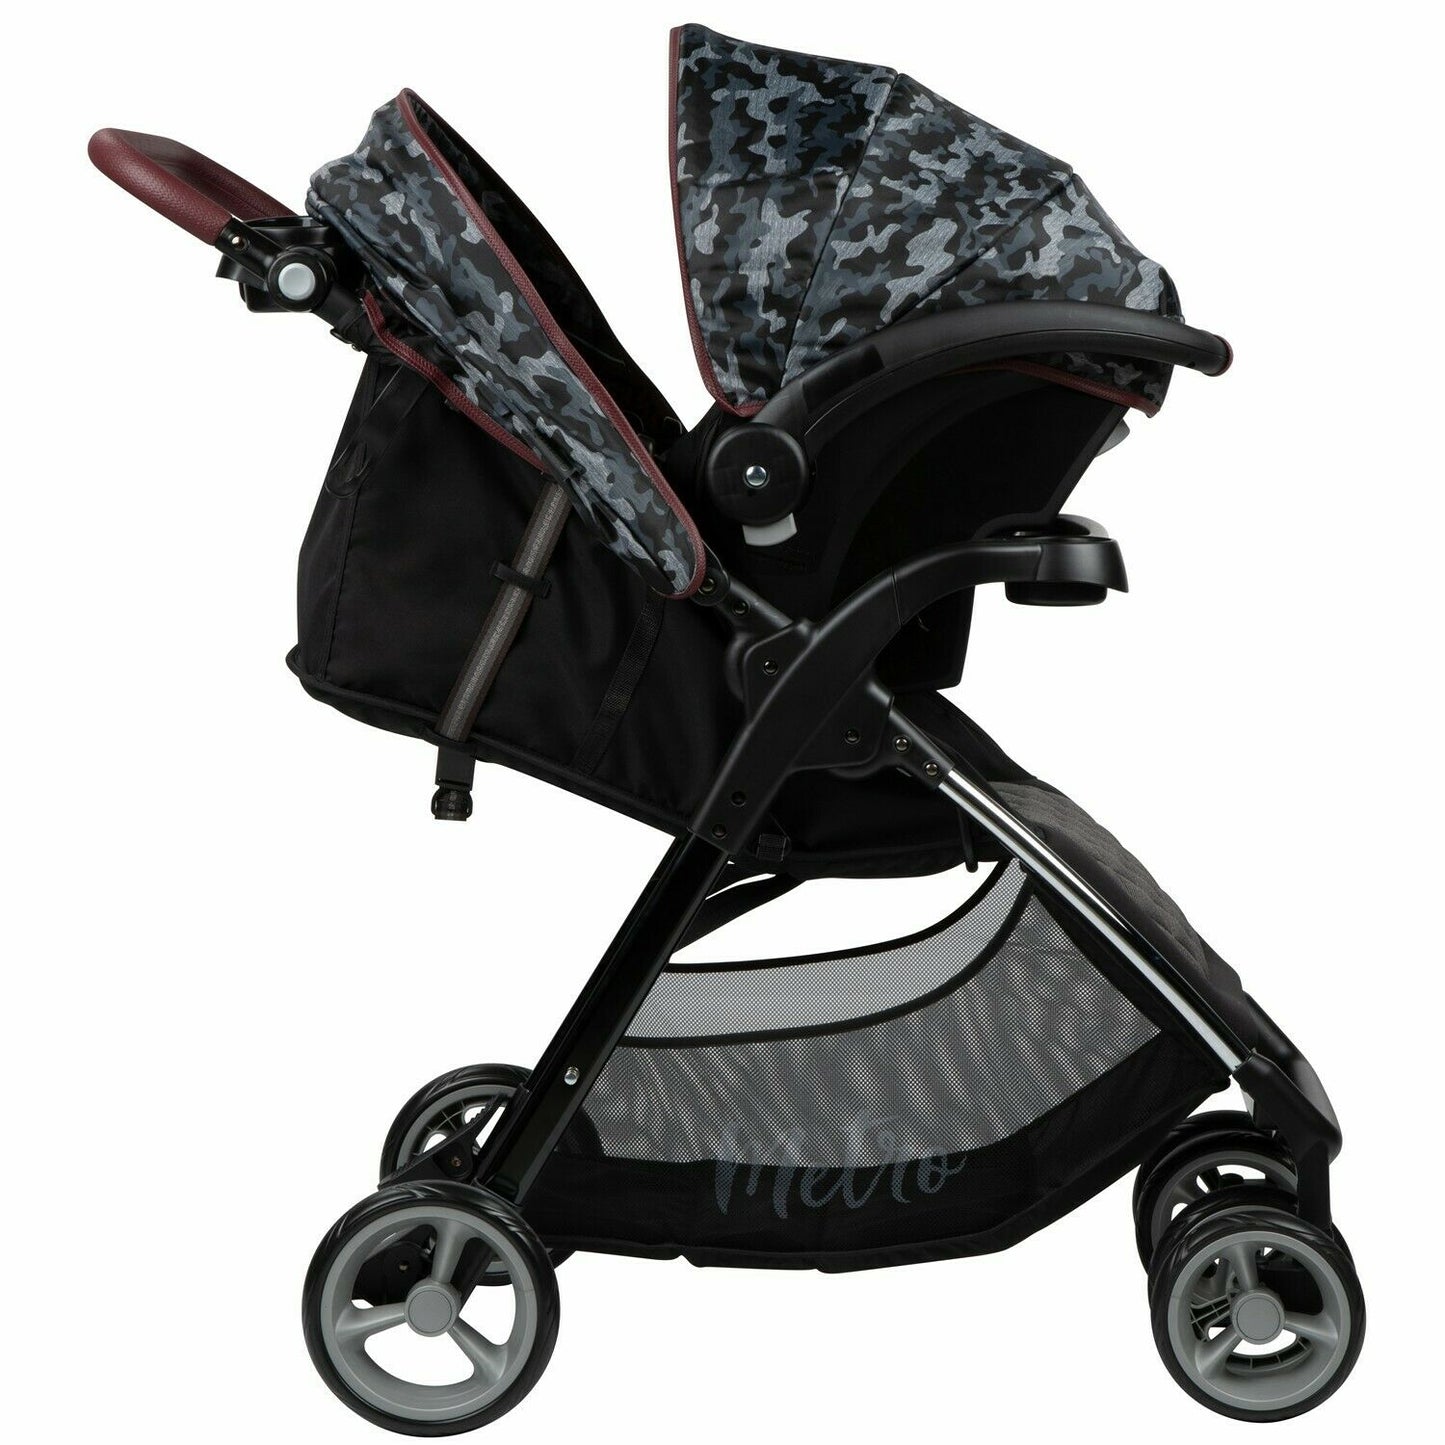 Baby Stroller with Car Seat Travel Infant Newborn Toddler Memory Foam Seats New